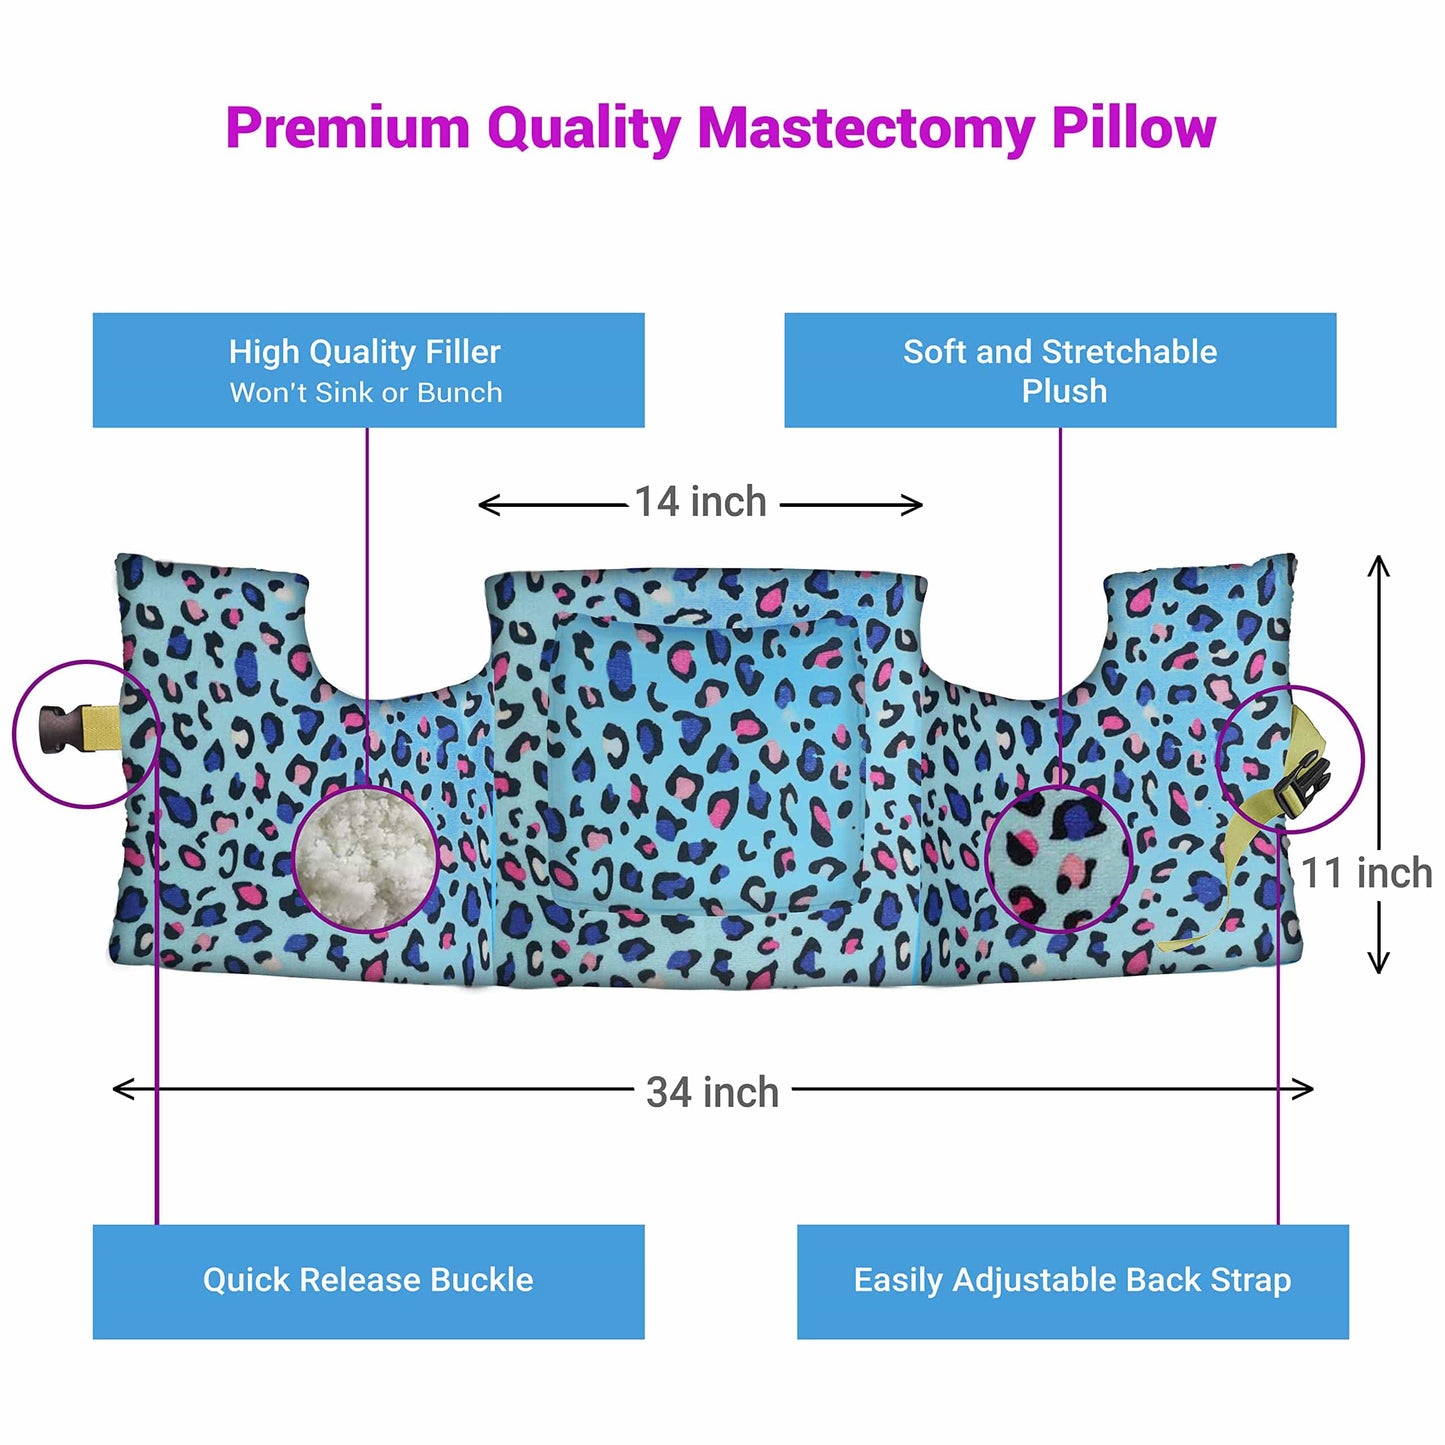 Post Surgery Pillow Mastectomy, Heart Surgery,  Breast Reduction & Augmentation for Sleeping, and Seatbelt Protection